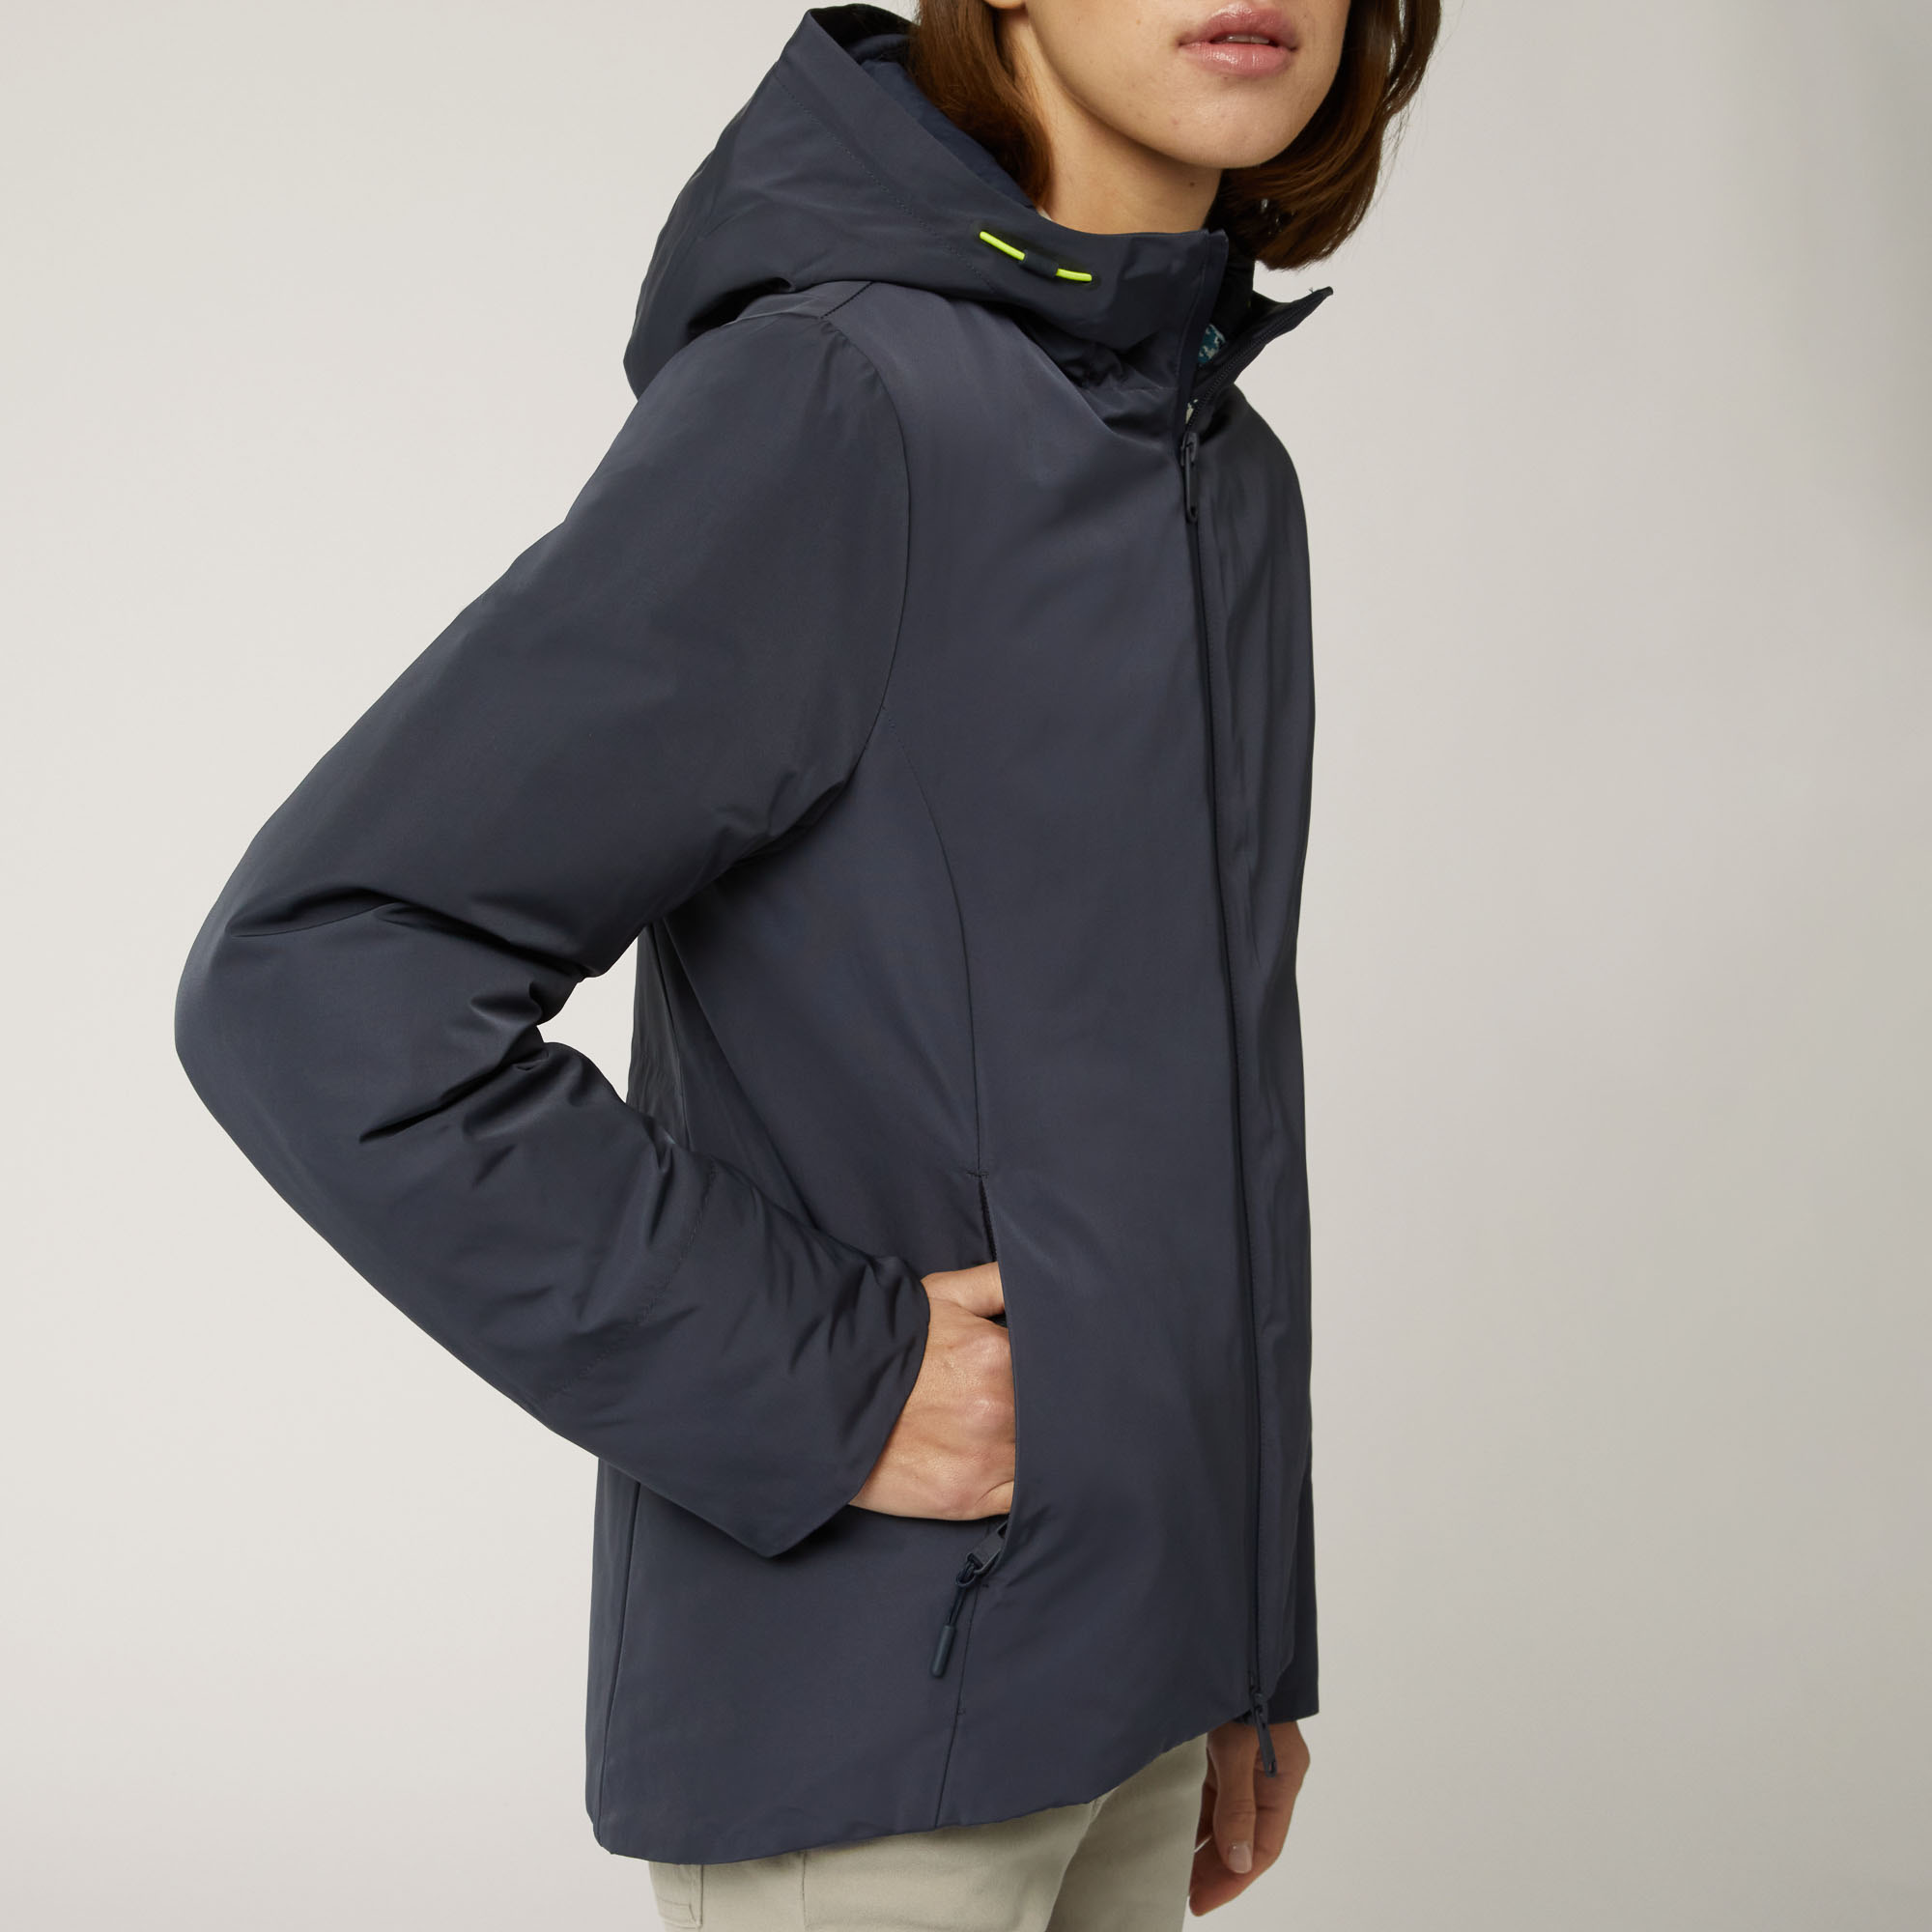 Giubbotto In Softshell Con Interno Stampato Elevate Dutility, Blu Navy, large image number 2